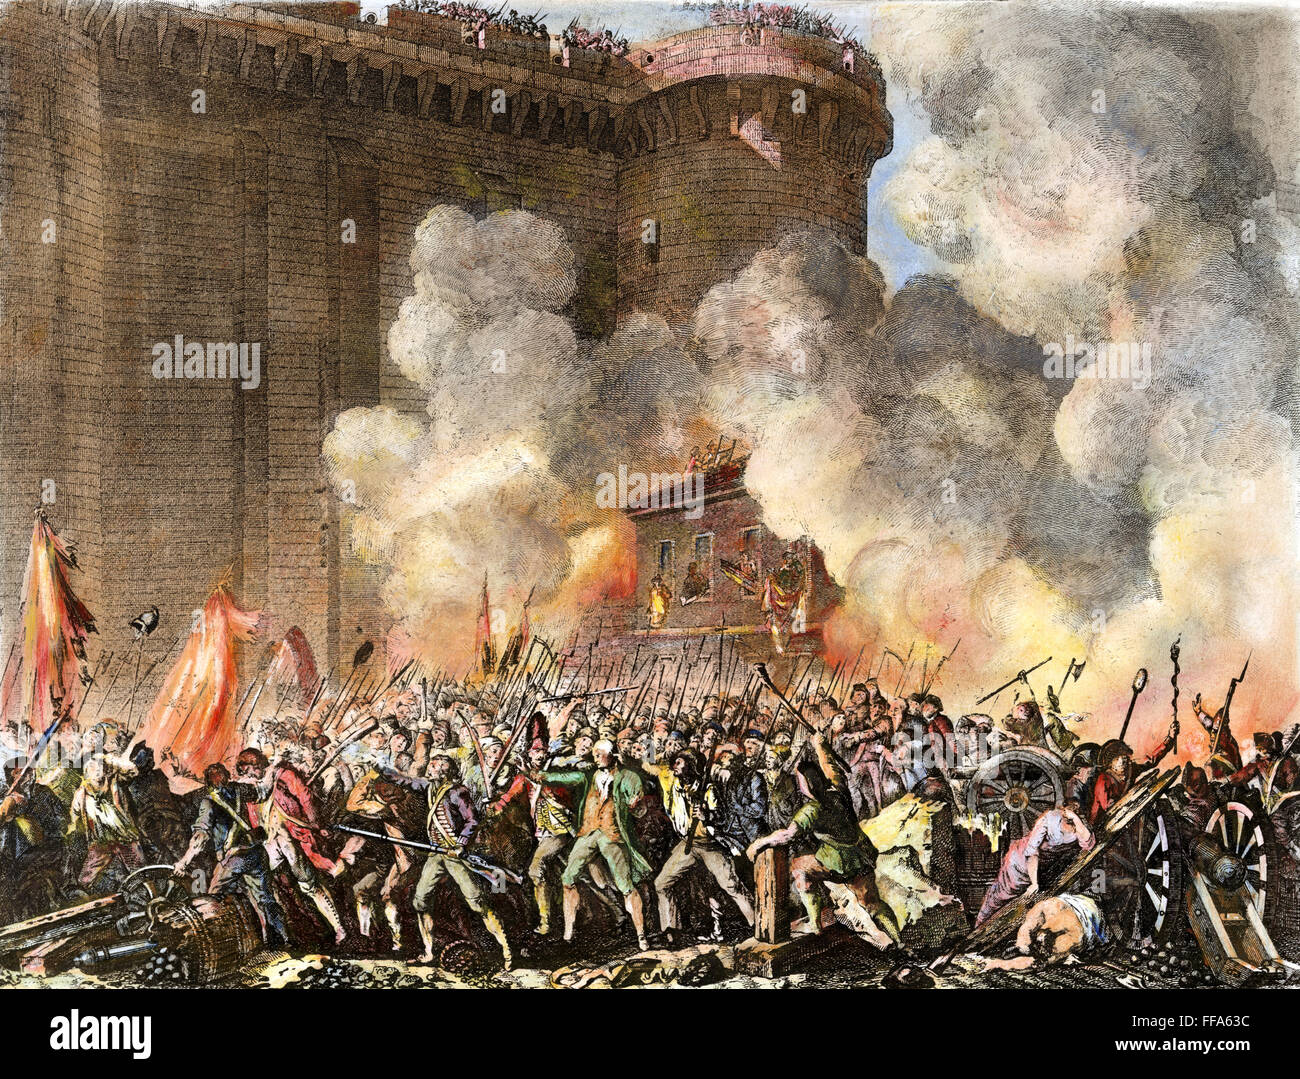 FRENCH REVOLUTION, 1789. /nThe Storming of the Bastille, 14 July 1789. Etching, French, 1817. French etching by Jean-Louis Prieur, 1817. Stock Photo